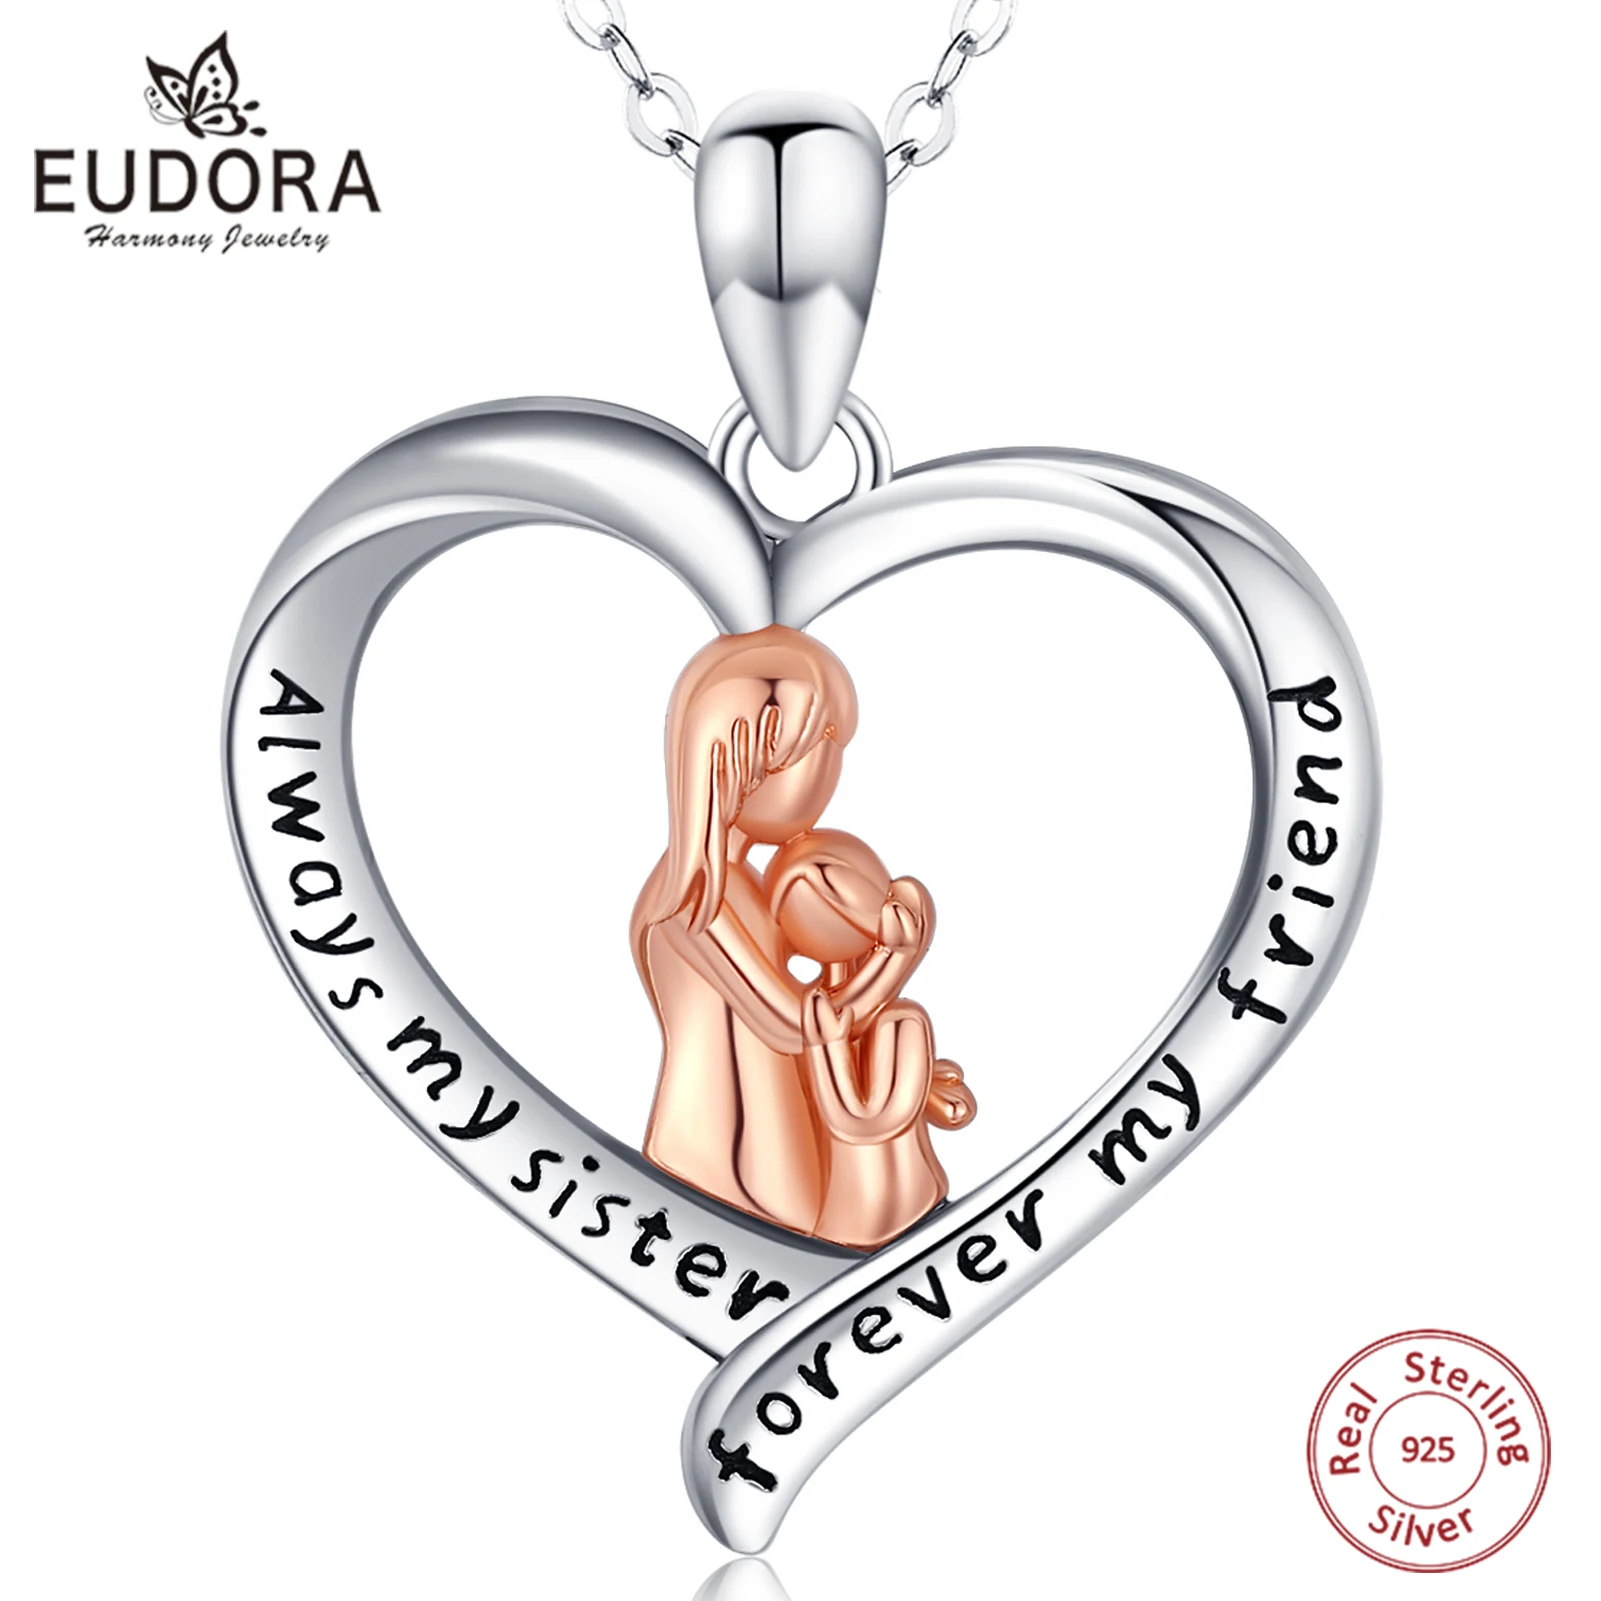 

Eudora 925 Sterling Silver Sister Heart Charm Pendant Good Friends Rose Gold Color necklace Friendship Jewelry for Sisters Gift